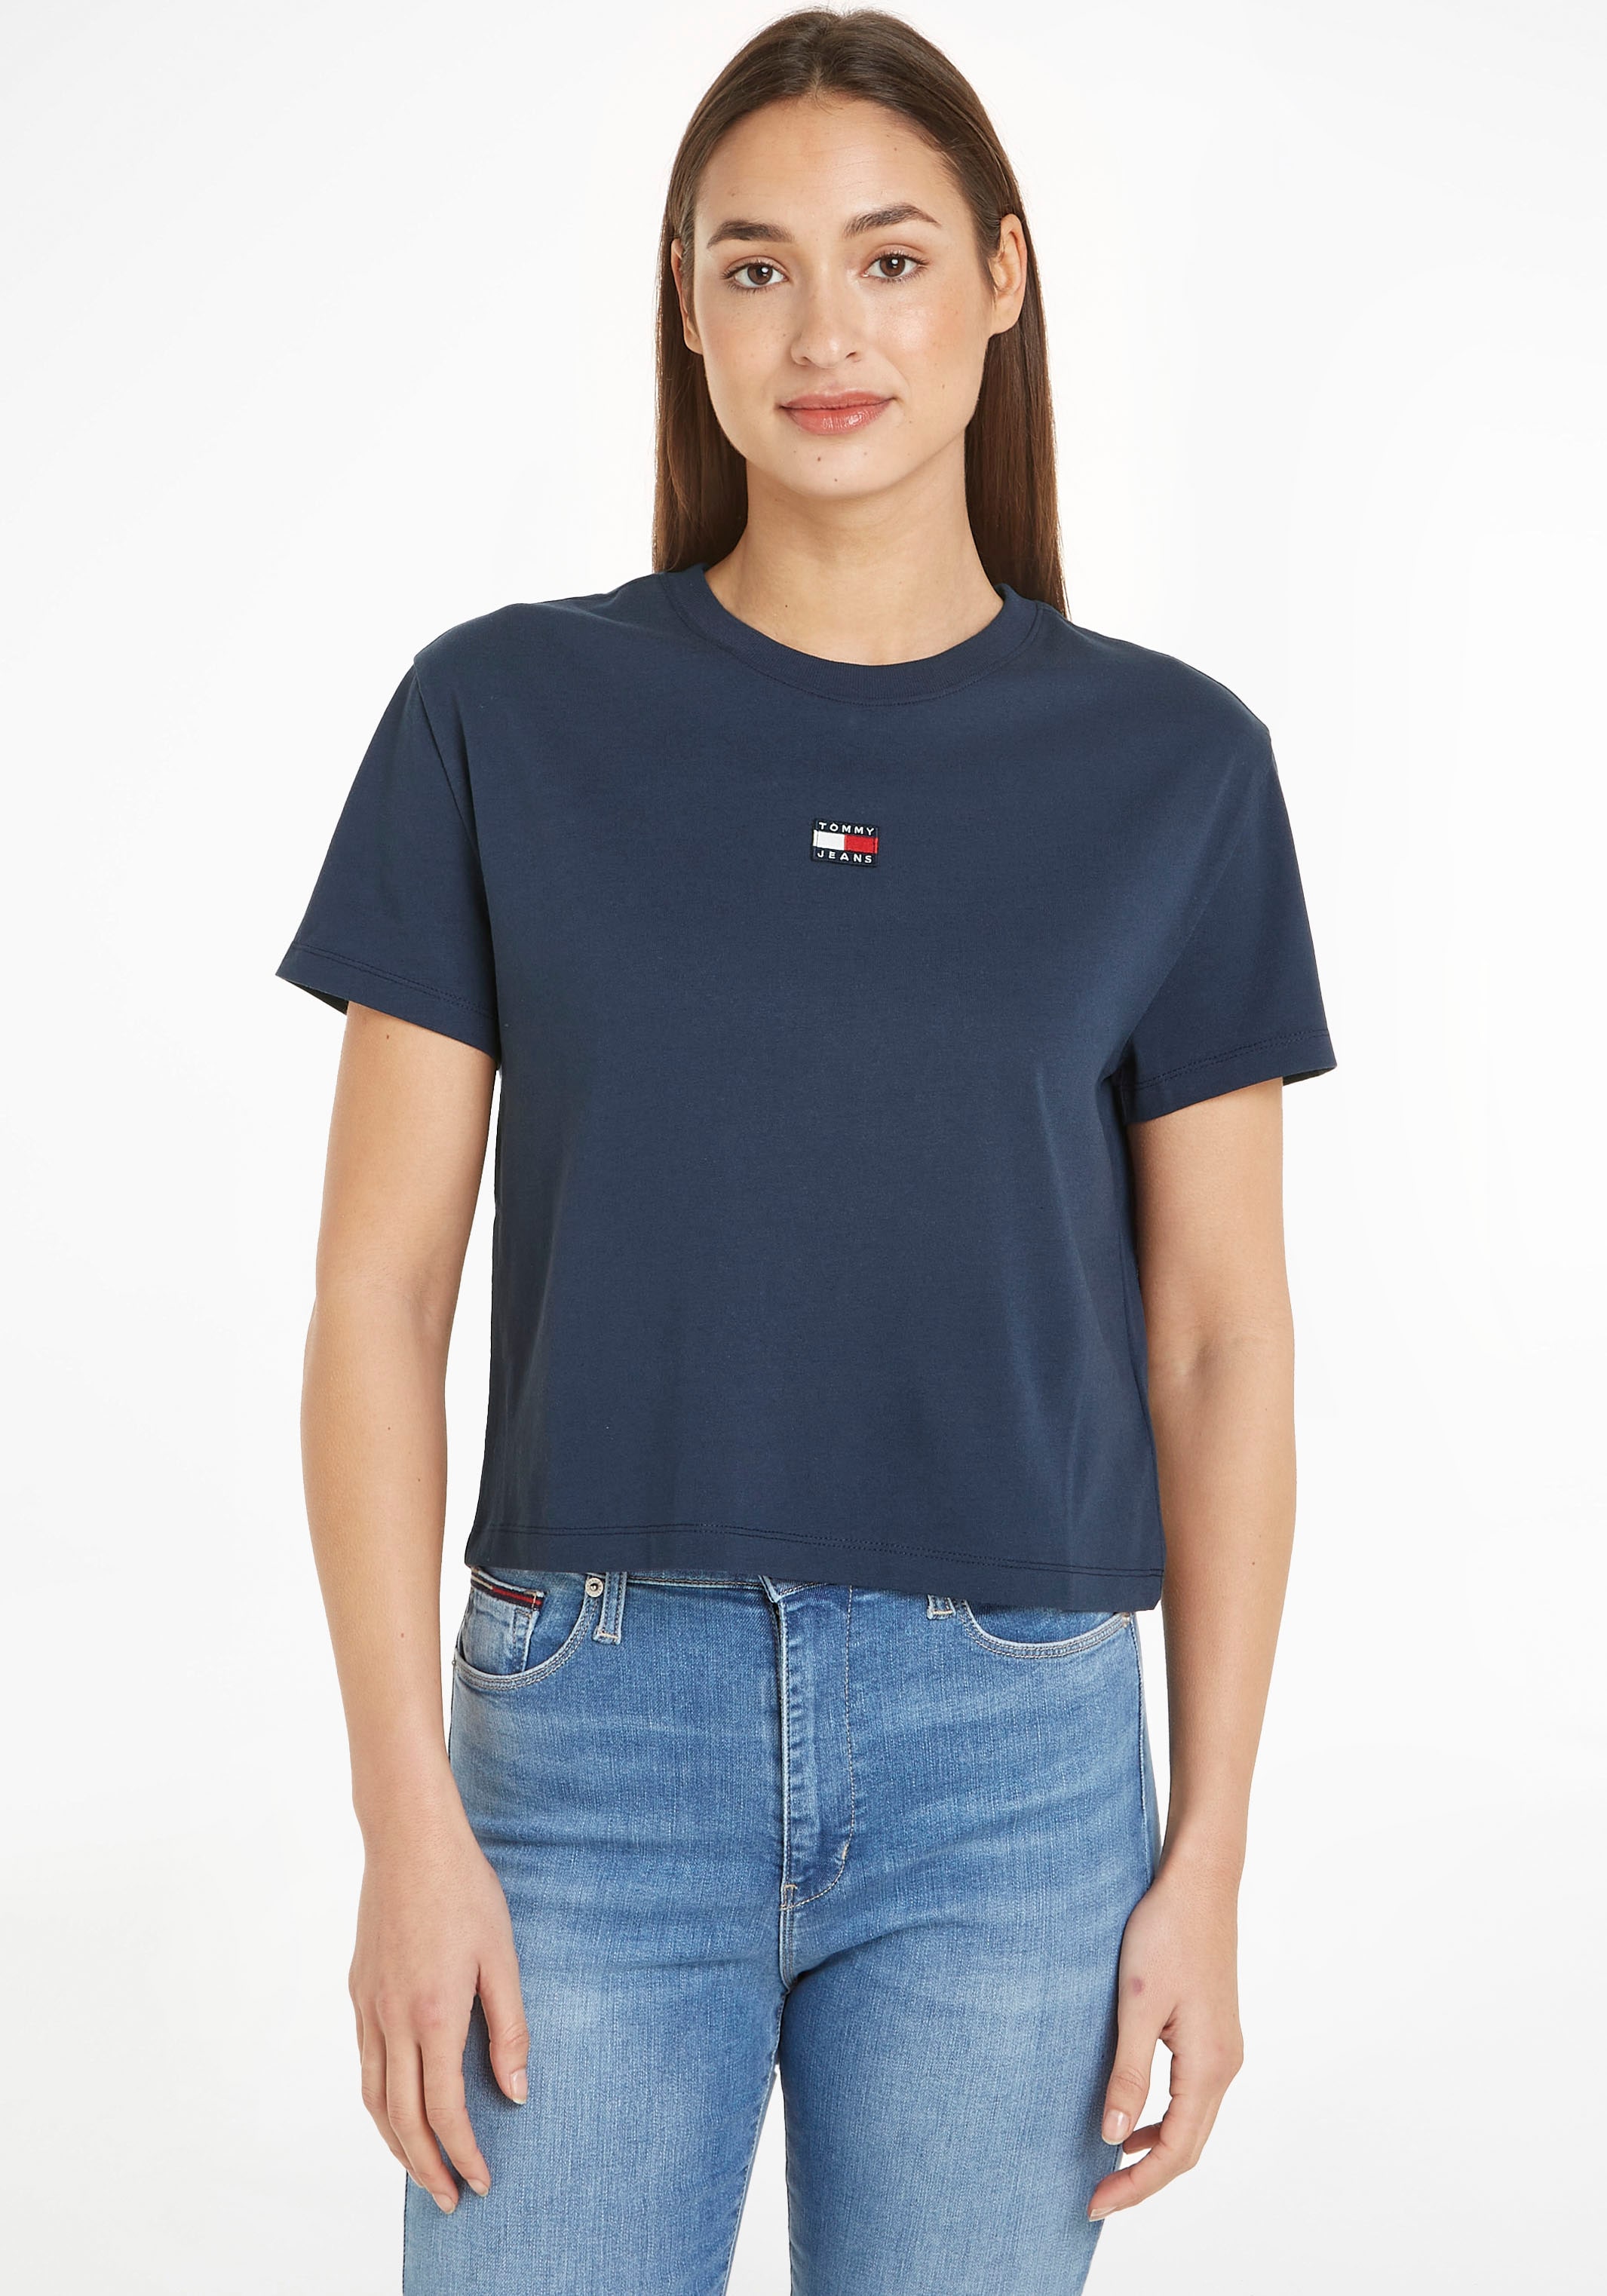 Tommy Jeans T-Shirt »TJW XS ♕ Logostickerei Brustkorb Jeans bei BADGE am mit Tommy TEE«, CLS